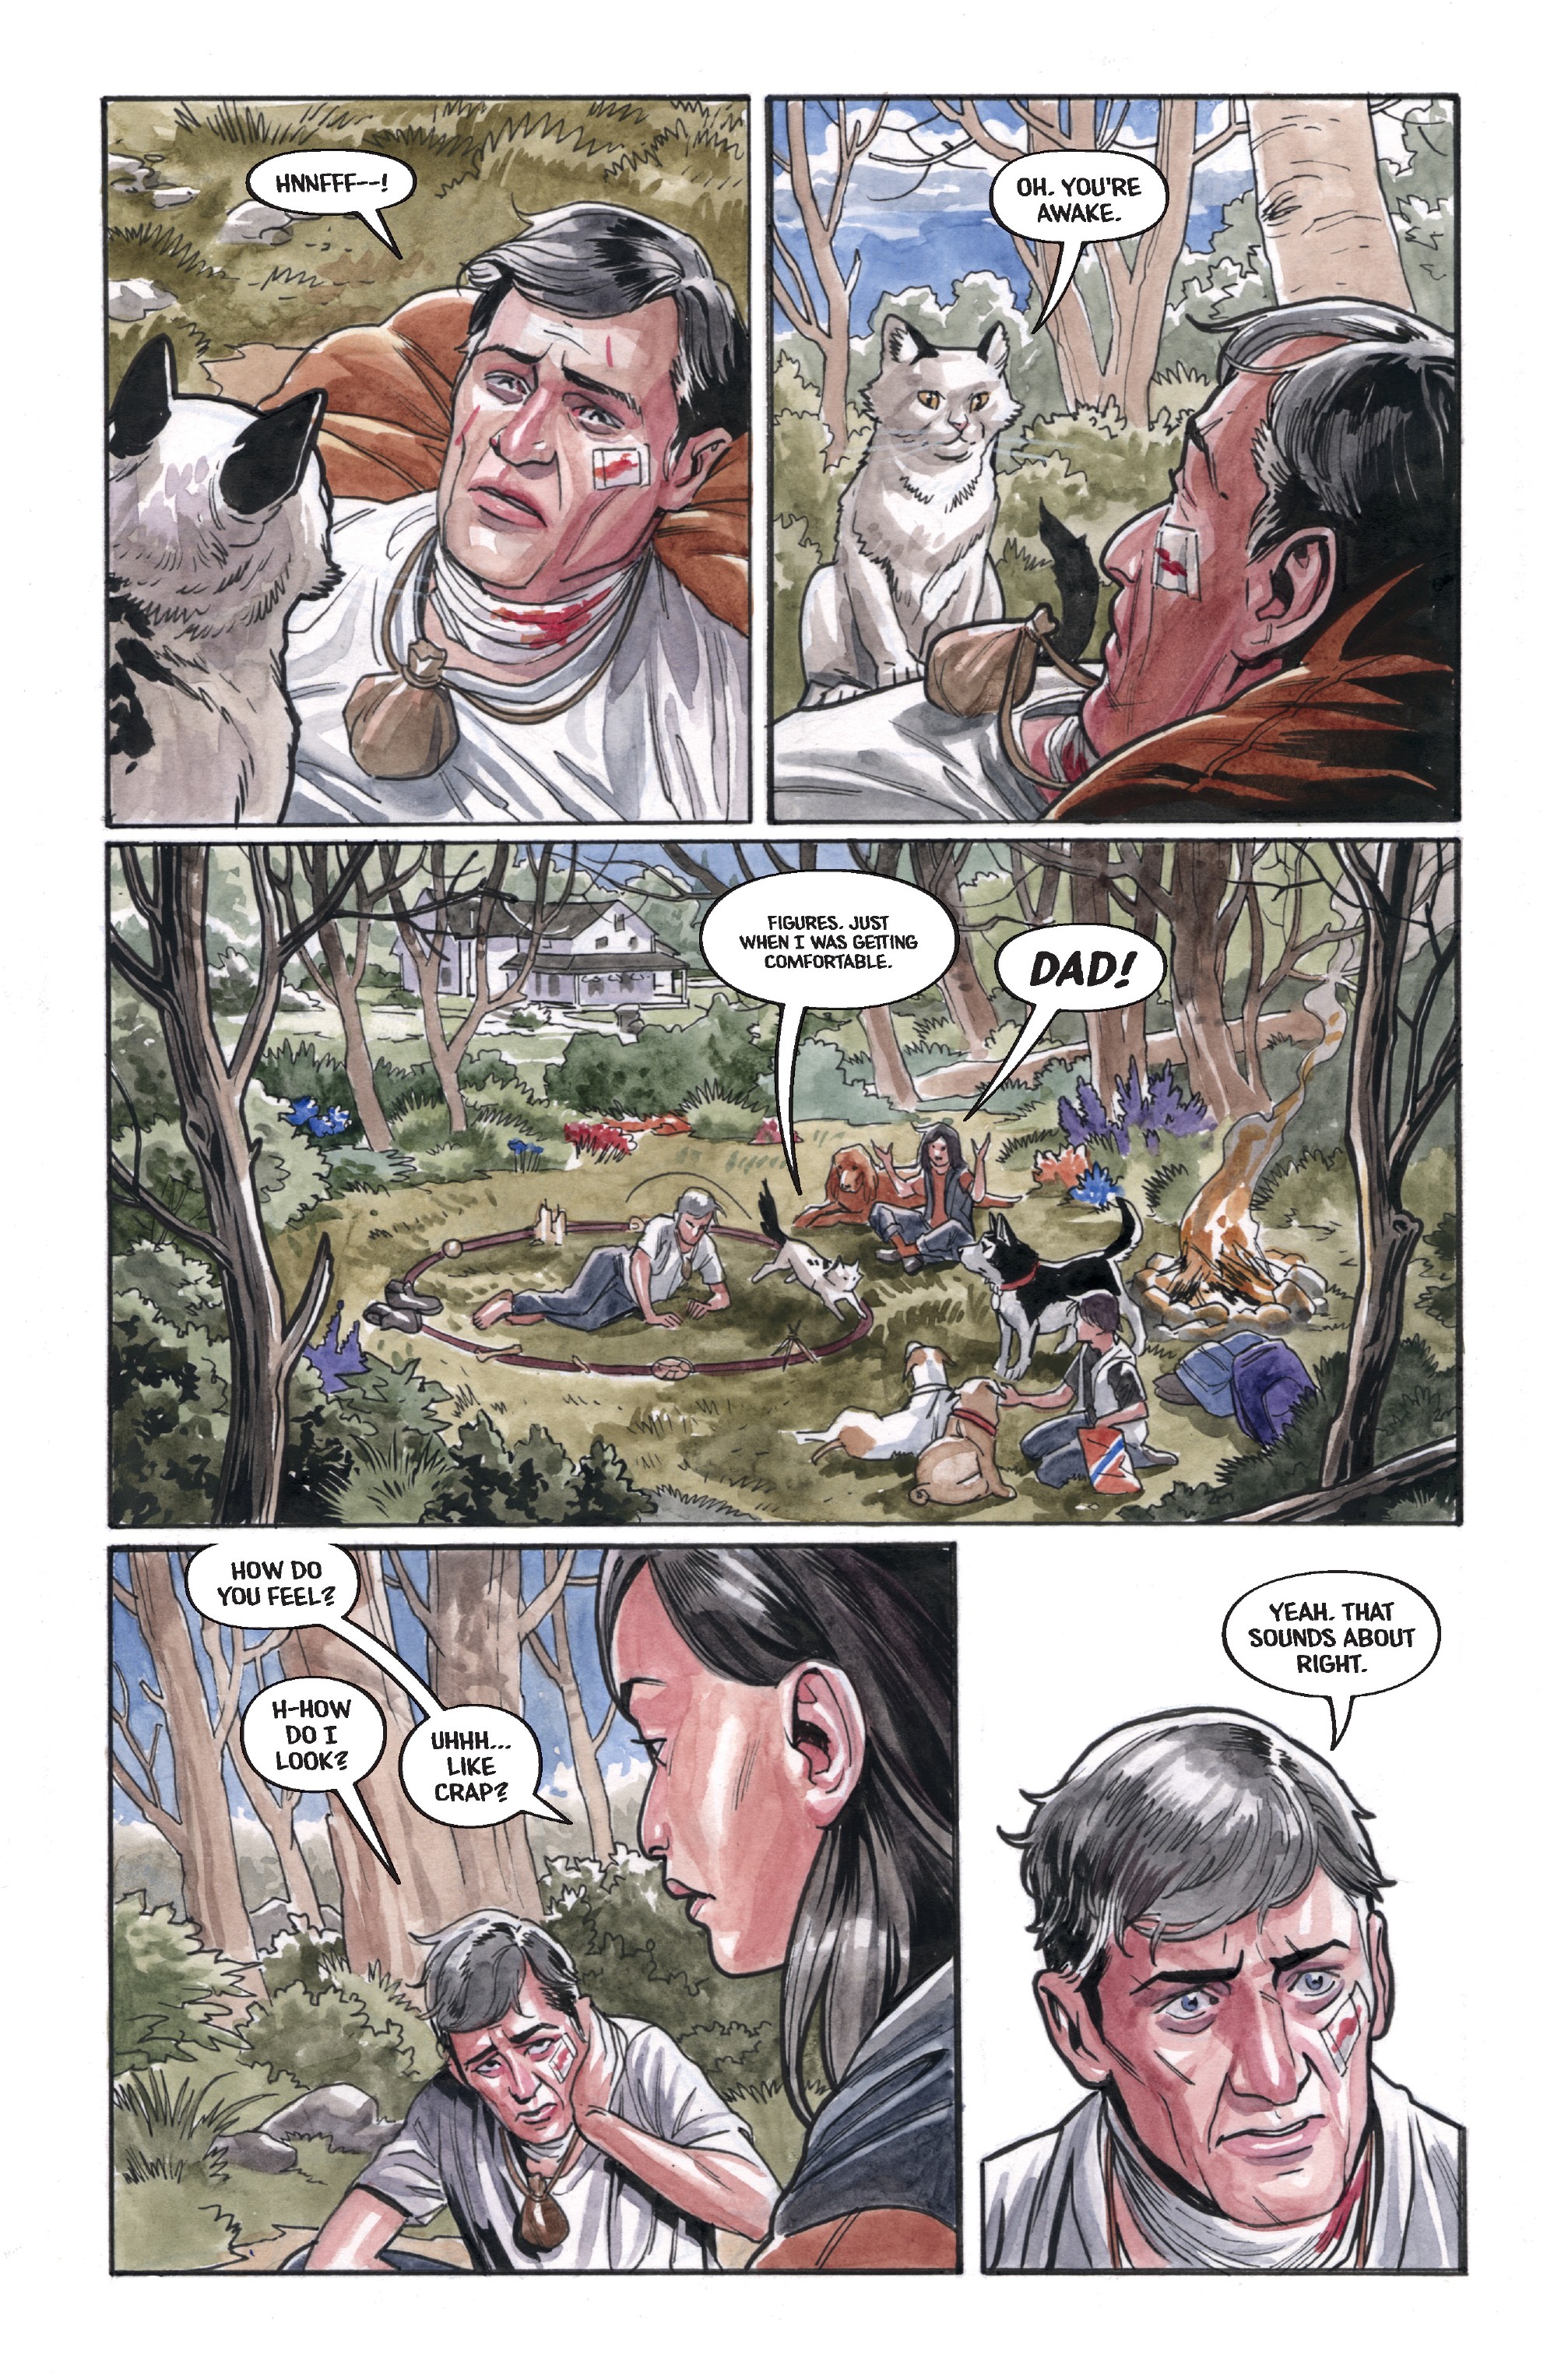 Beasts of Burden: The Presence of Others (2019-): Chapter 2 - Page 4